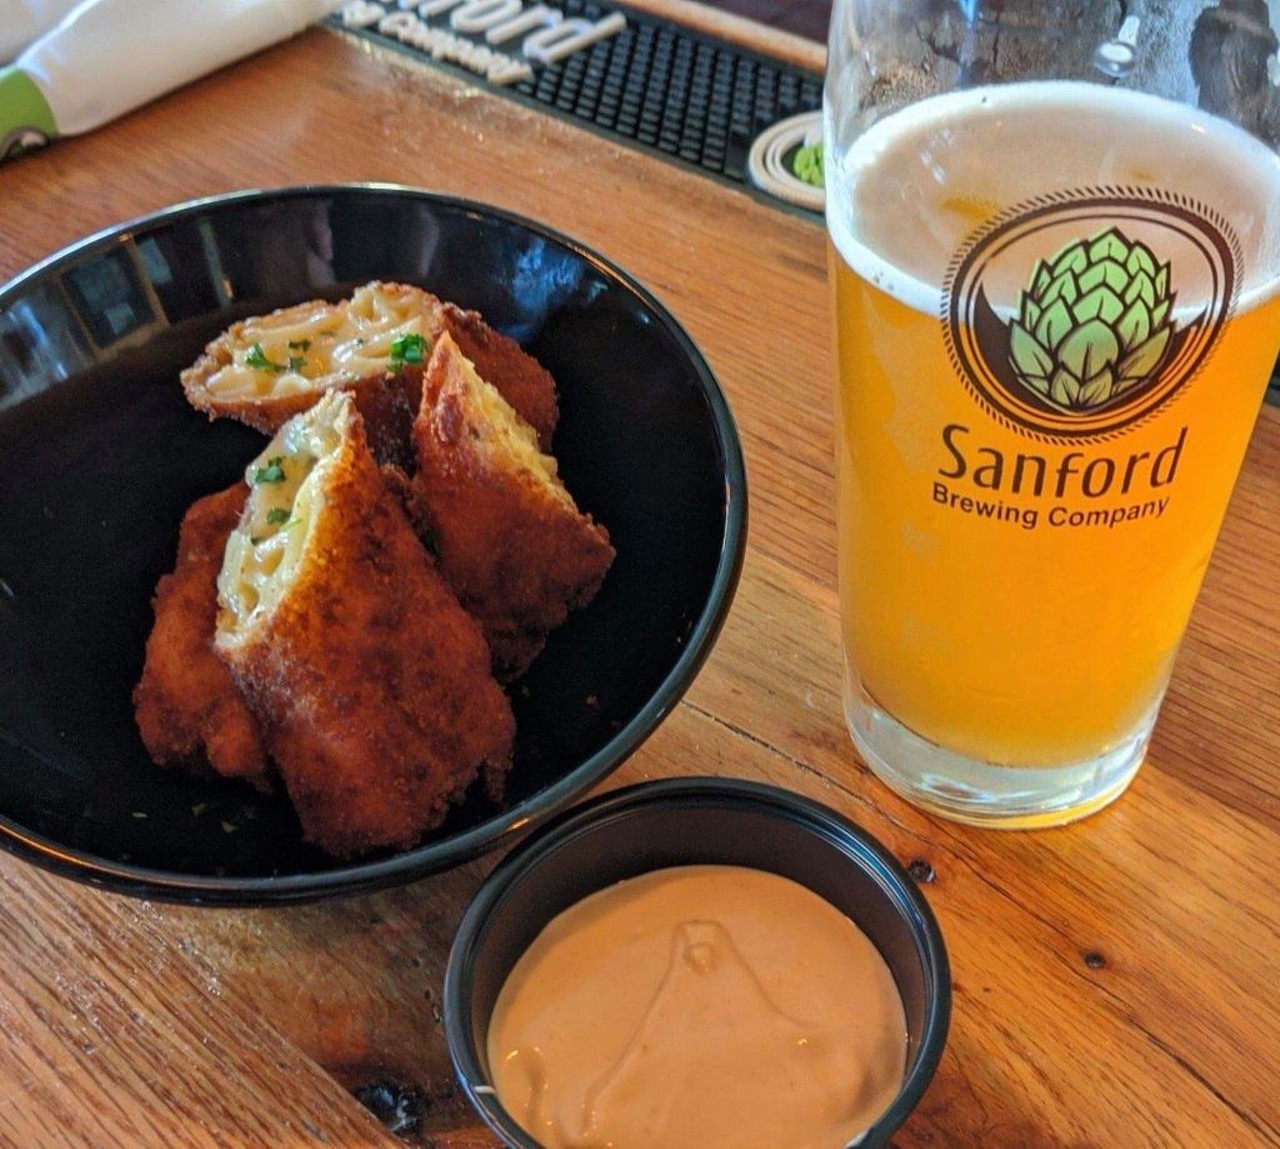 Sanford Brewing Company 
160 Independence Lane Suite B, Maitland
This dog and family friendly brewery-gastropub is located in historic Sanford. Their Amber 22 and seasonal marzen are perfect fall beers.
Photo via Sanford Brewing Company/Facebook